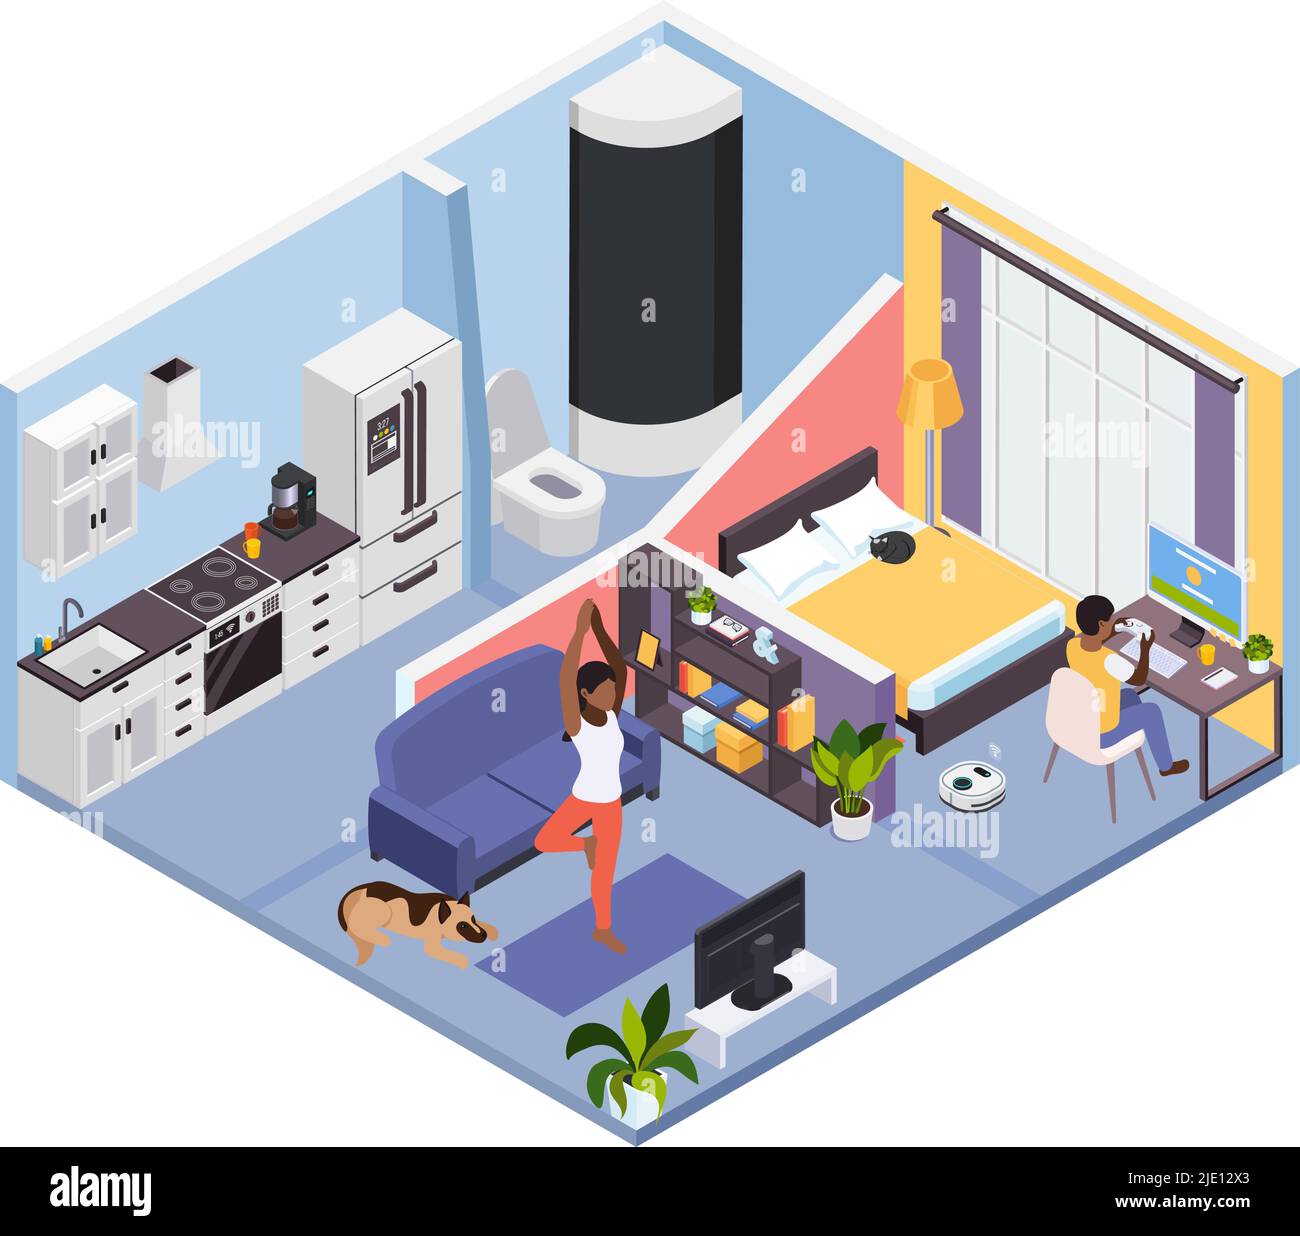 Working distantly following gym program online during corona virus stay home isometric apartment interior vector illustration Stock Vector